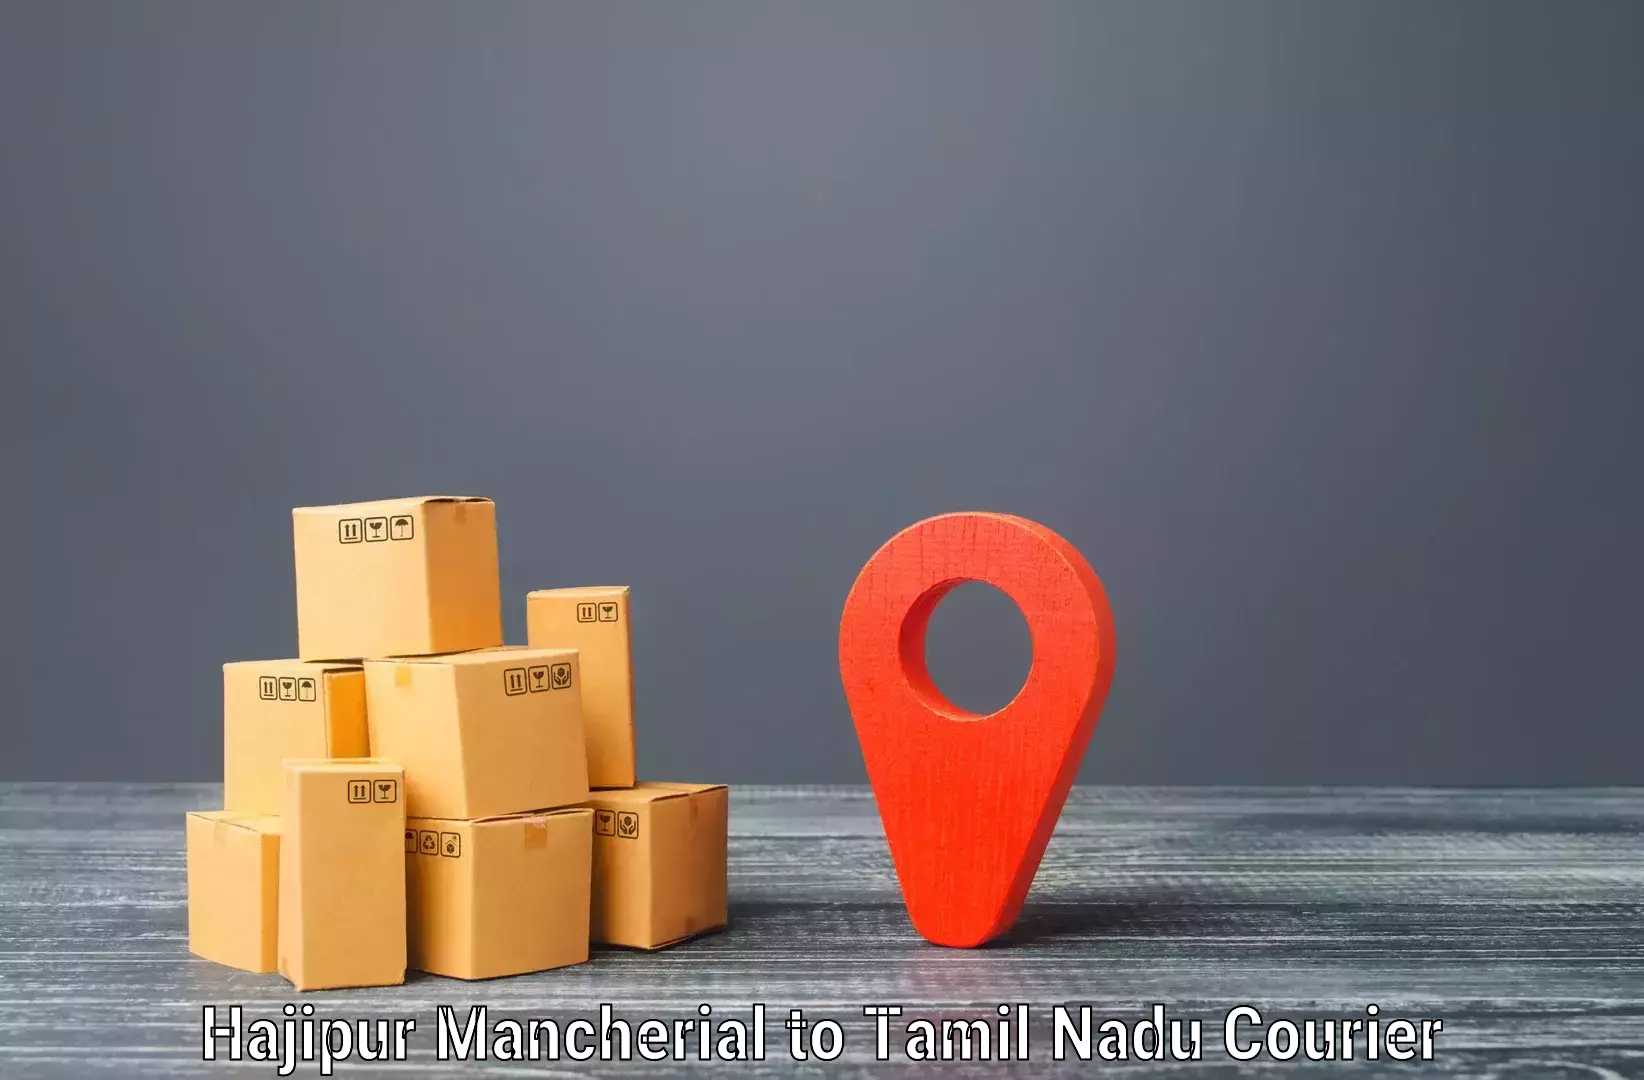 Easy access courier services Hajipur Mancherial to Melmaruvathur